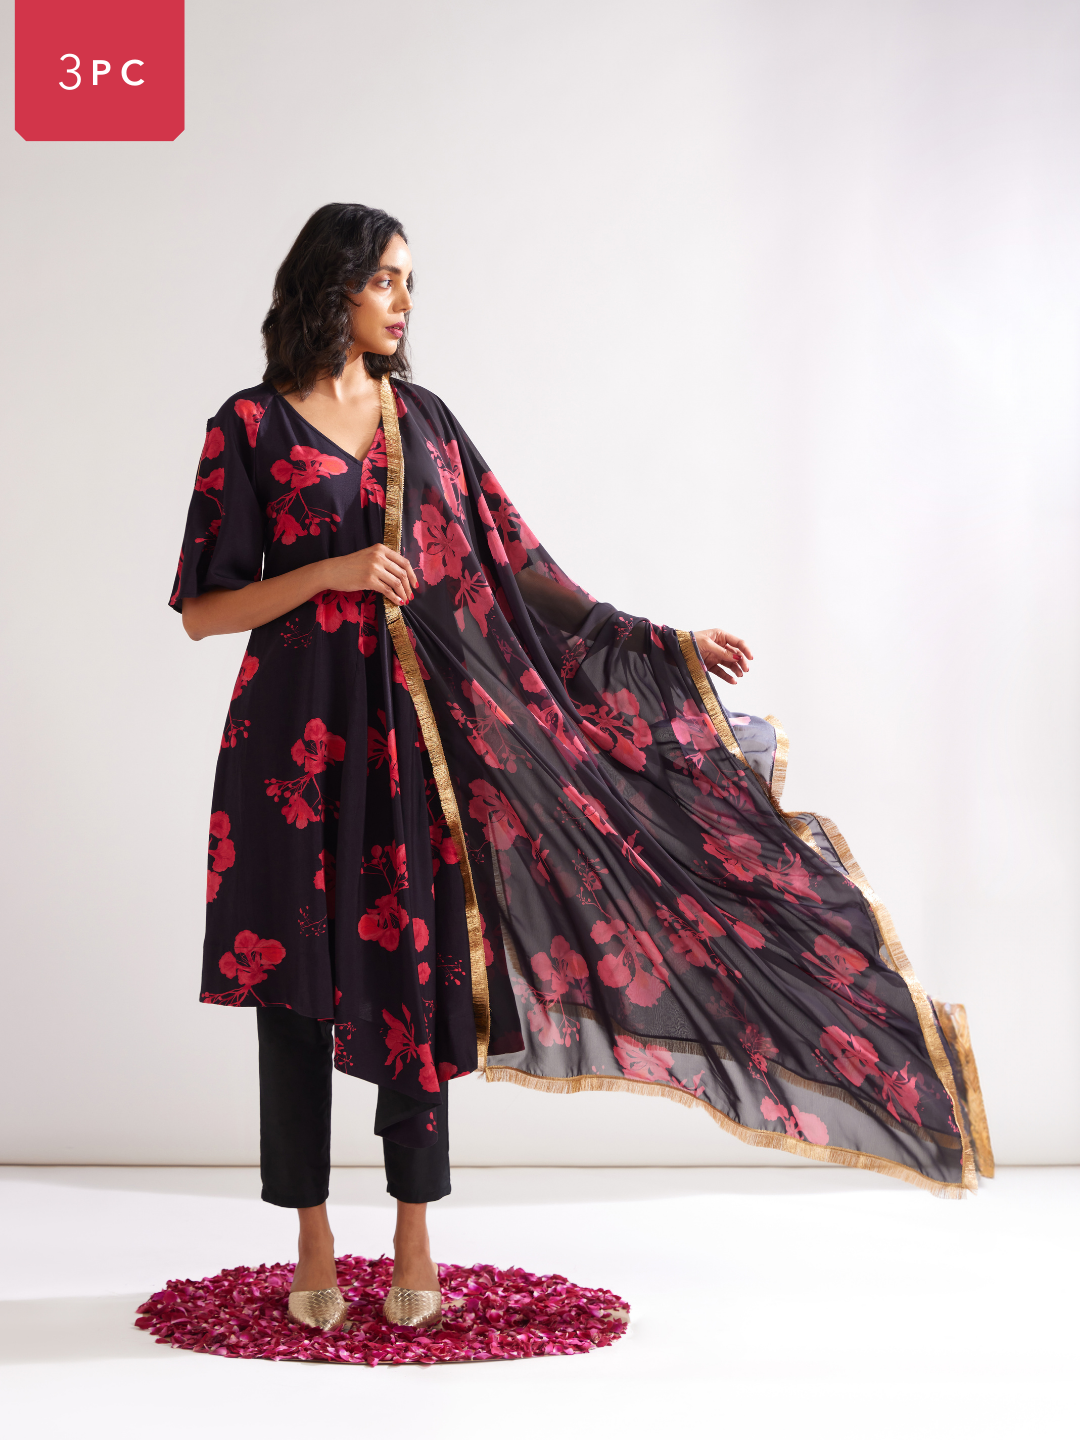 Asymmetrical Gulmohar kurta with cut out sleeves paired with pegged pants along with dupatta- Rich black